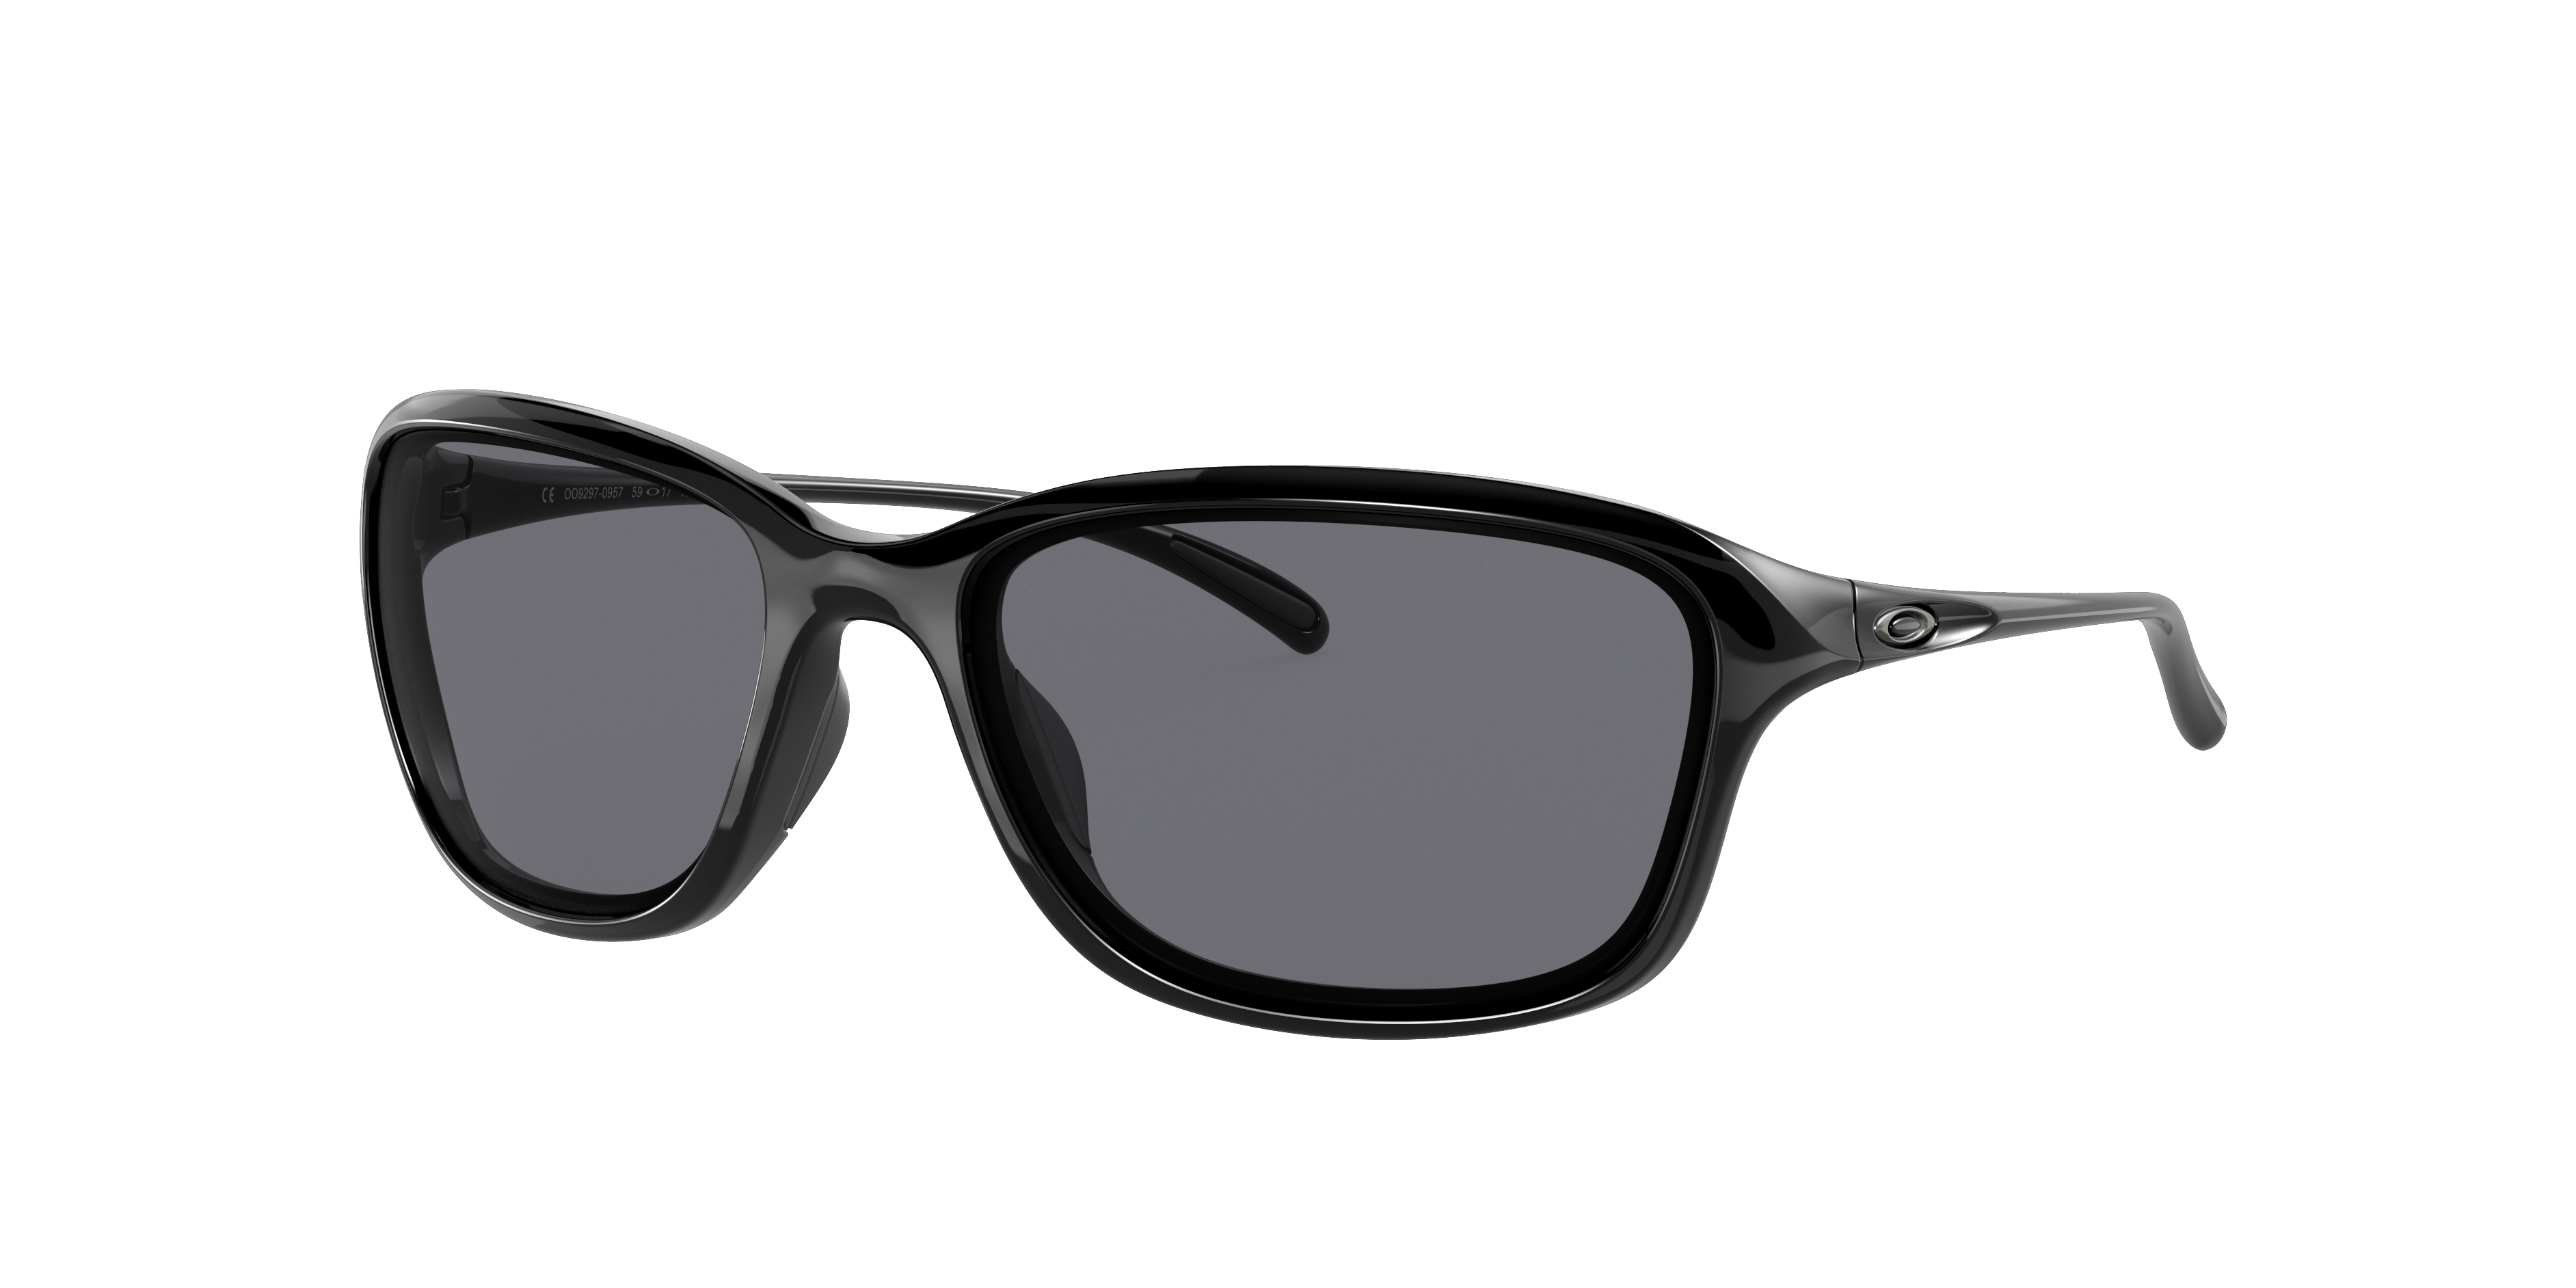 Oakley OO9297 She's Unstoppable 59 Grey & Polished Black 